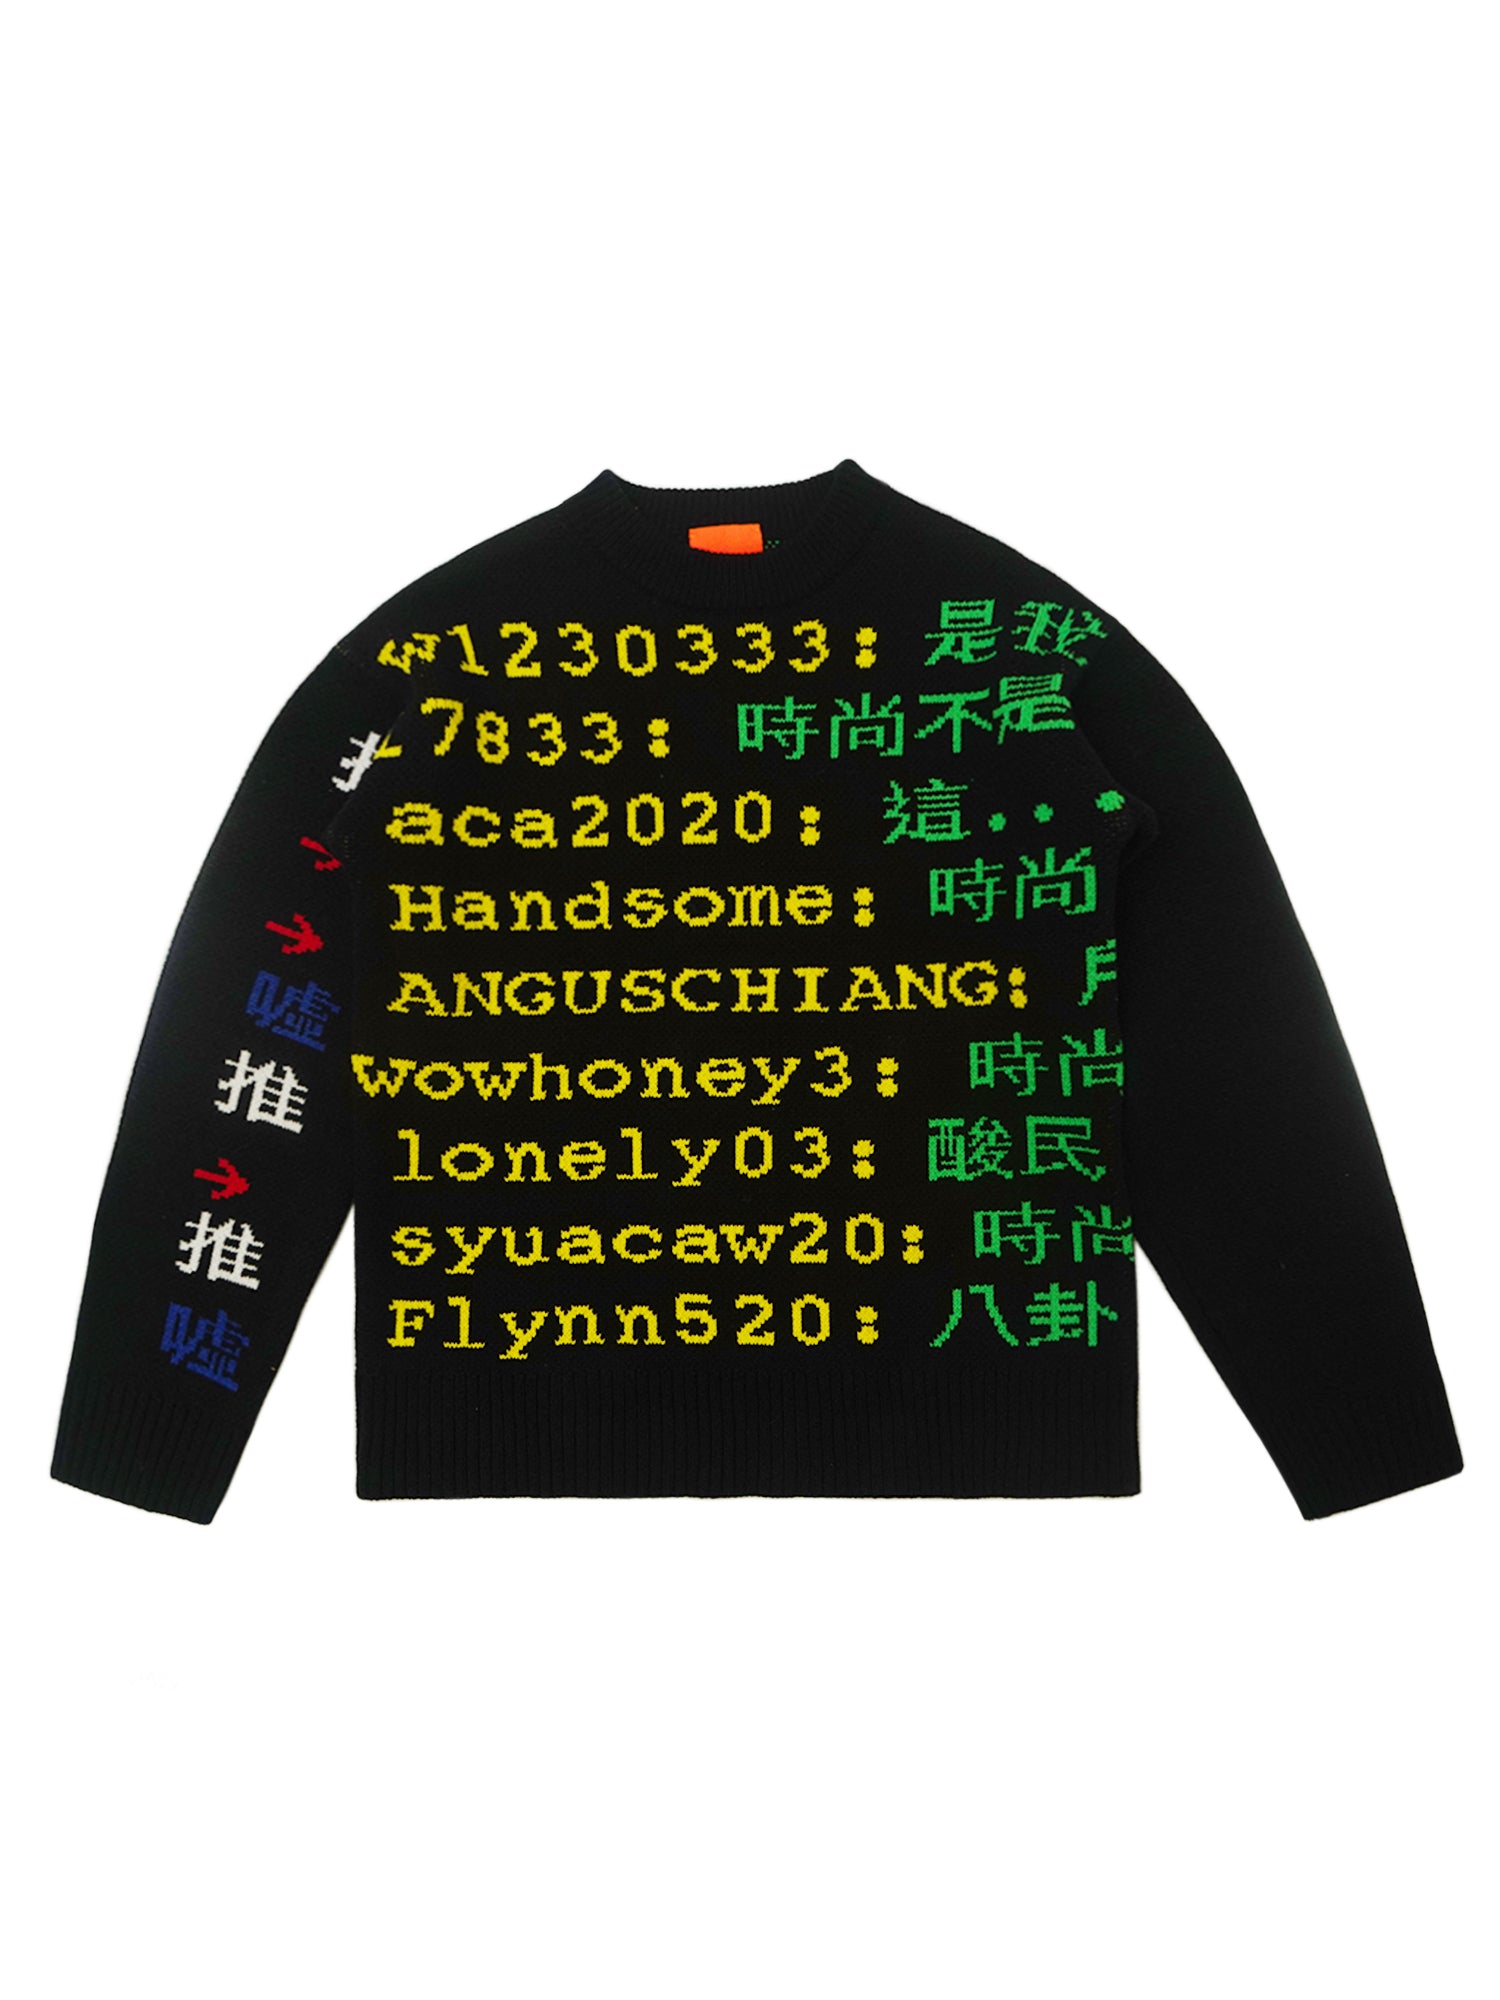 MESSAGE ON SOCIAL MEDIA SWEATER